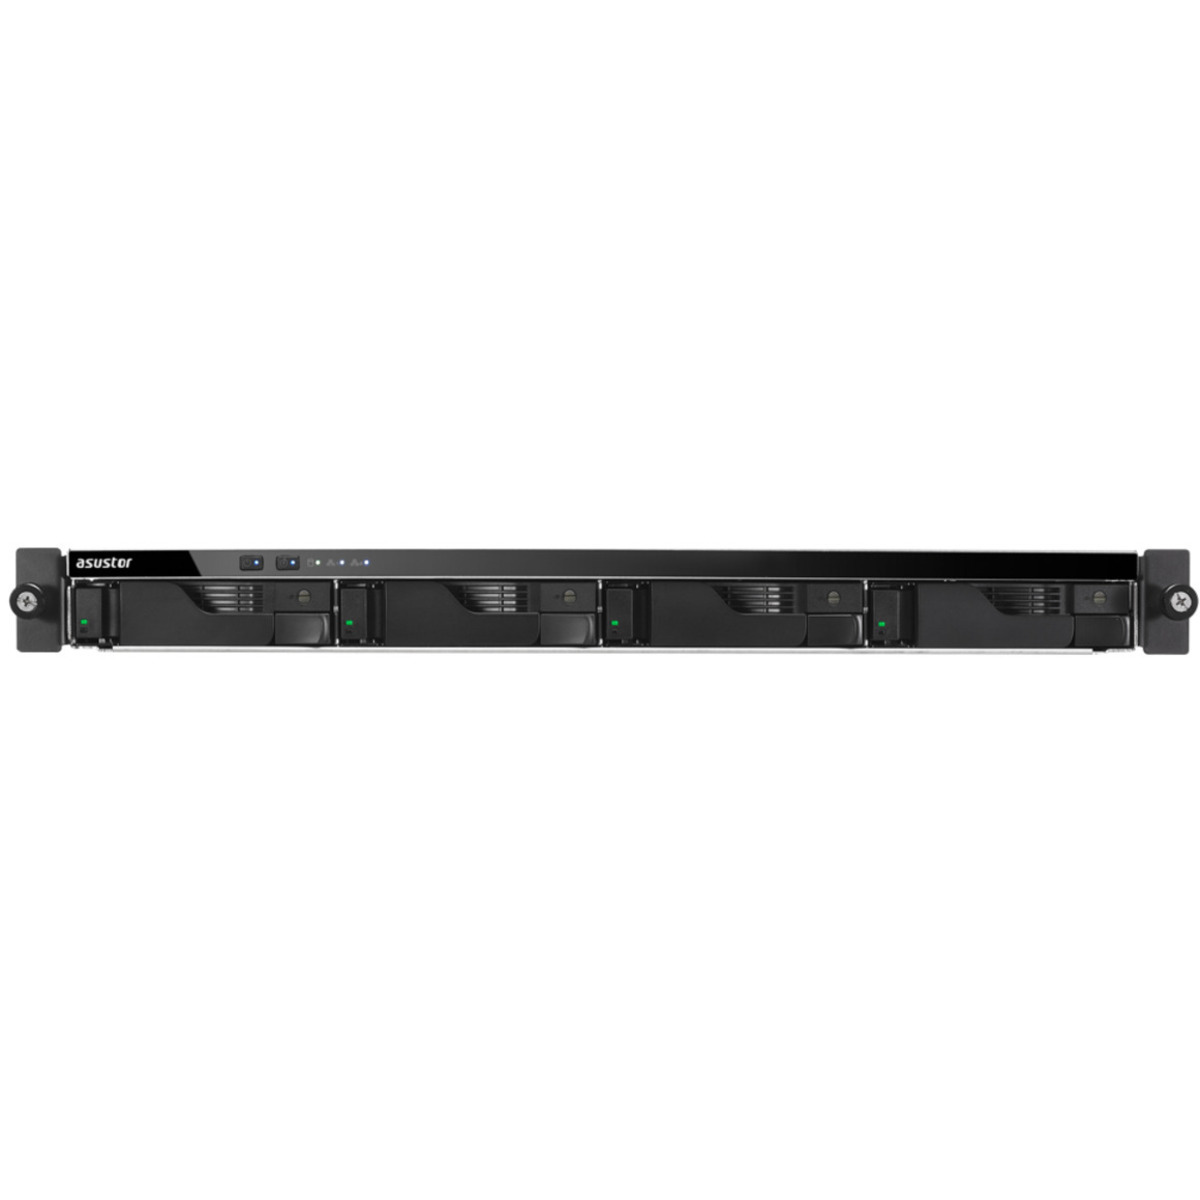 ASUSTOR LOCKERSTOR 4RS AS6504RS 36tb 4-Bay RackMount Multimedia / Power User / Business NAS - Network Attached Storage Device 3x12tb Toshiba Enterprise Capacity MG07ACA12TE 3.5 7200rpm SATA 6Gb/s HDD ENTERPRISE Class Drives Installed - Burn-In Tested - FREE RAM UPGRADE LOCKERSTOR 4RS AS6504RS